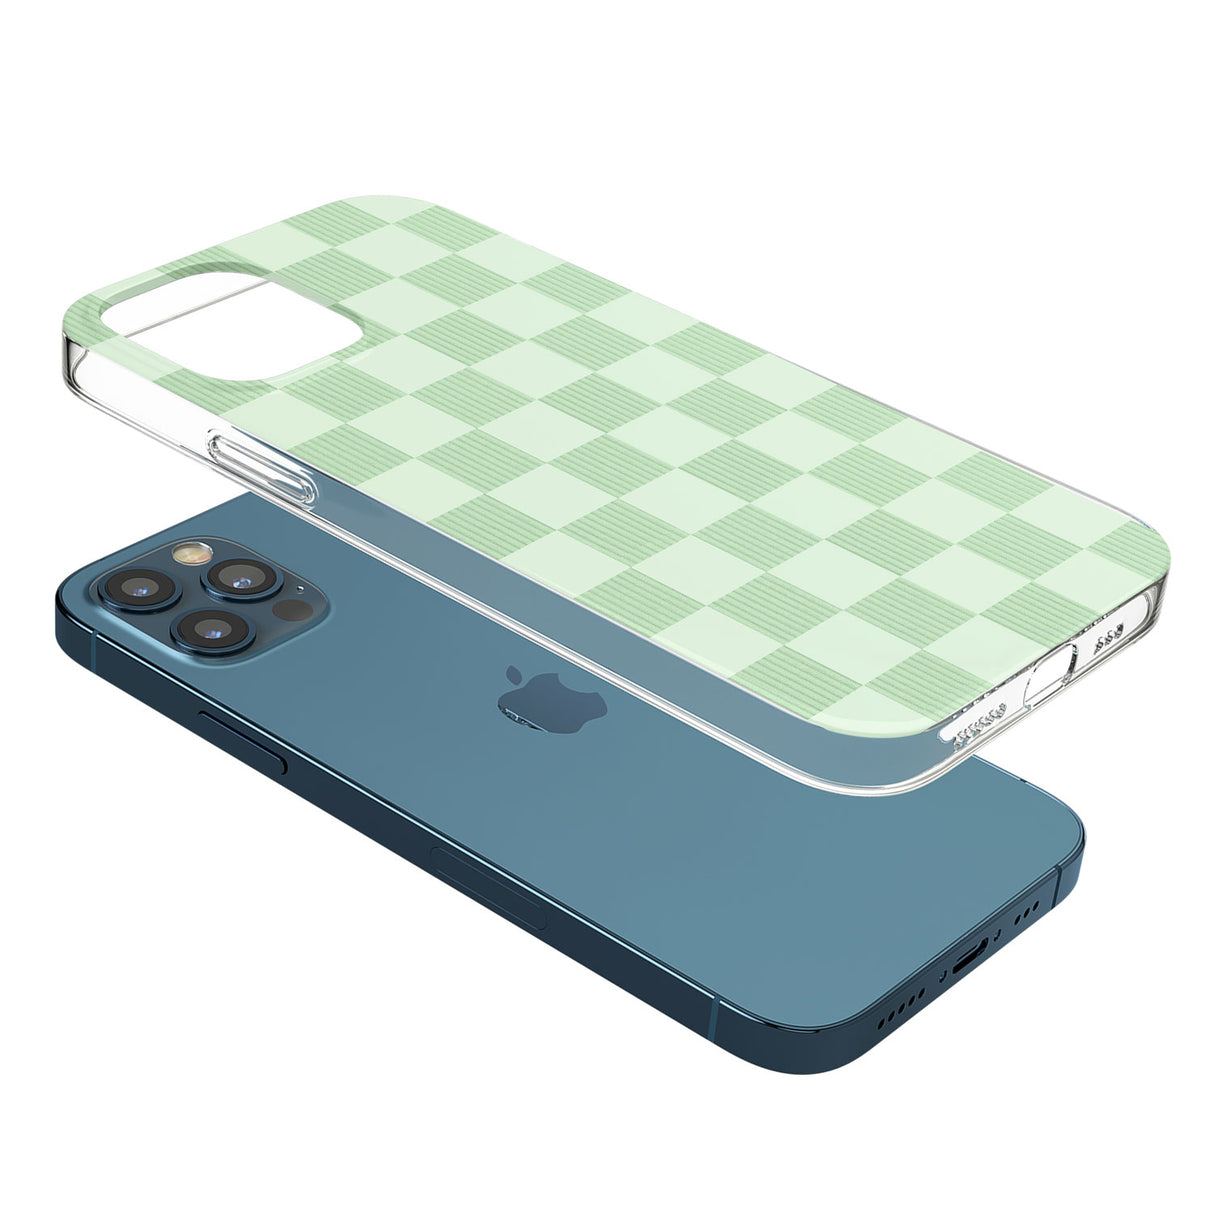 SEAFOAM CHECKERED Phone Case for iPhone 12 Pro